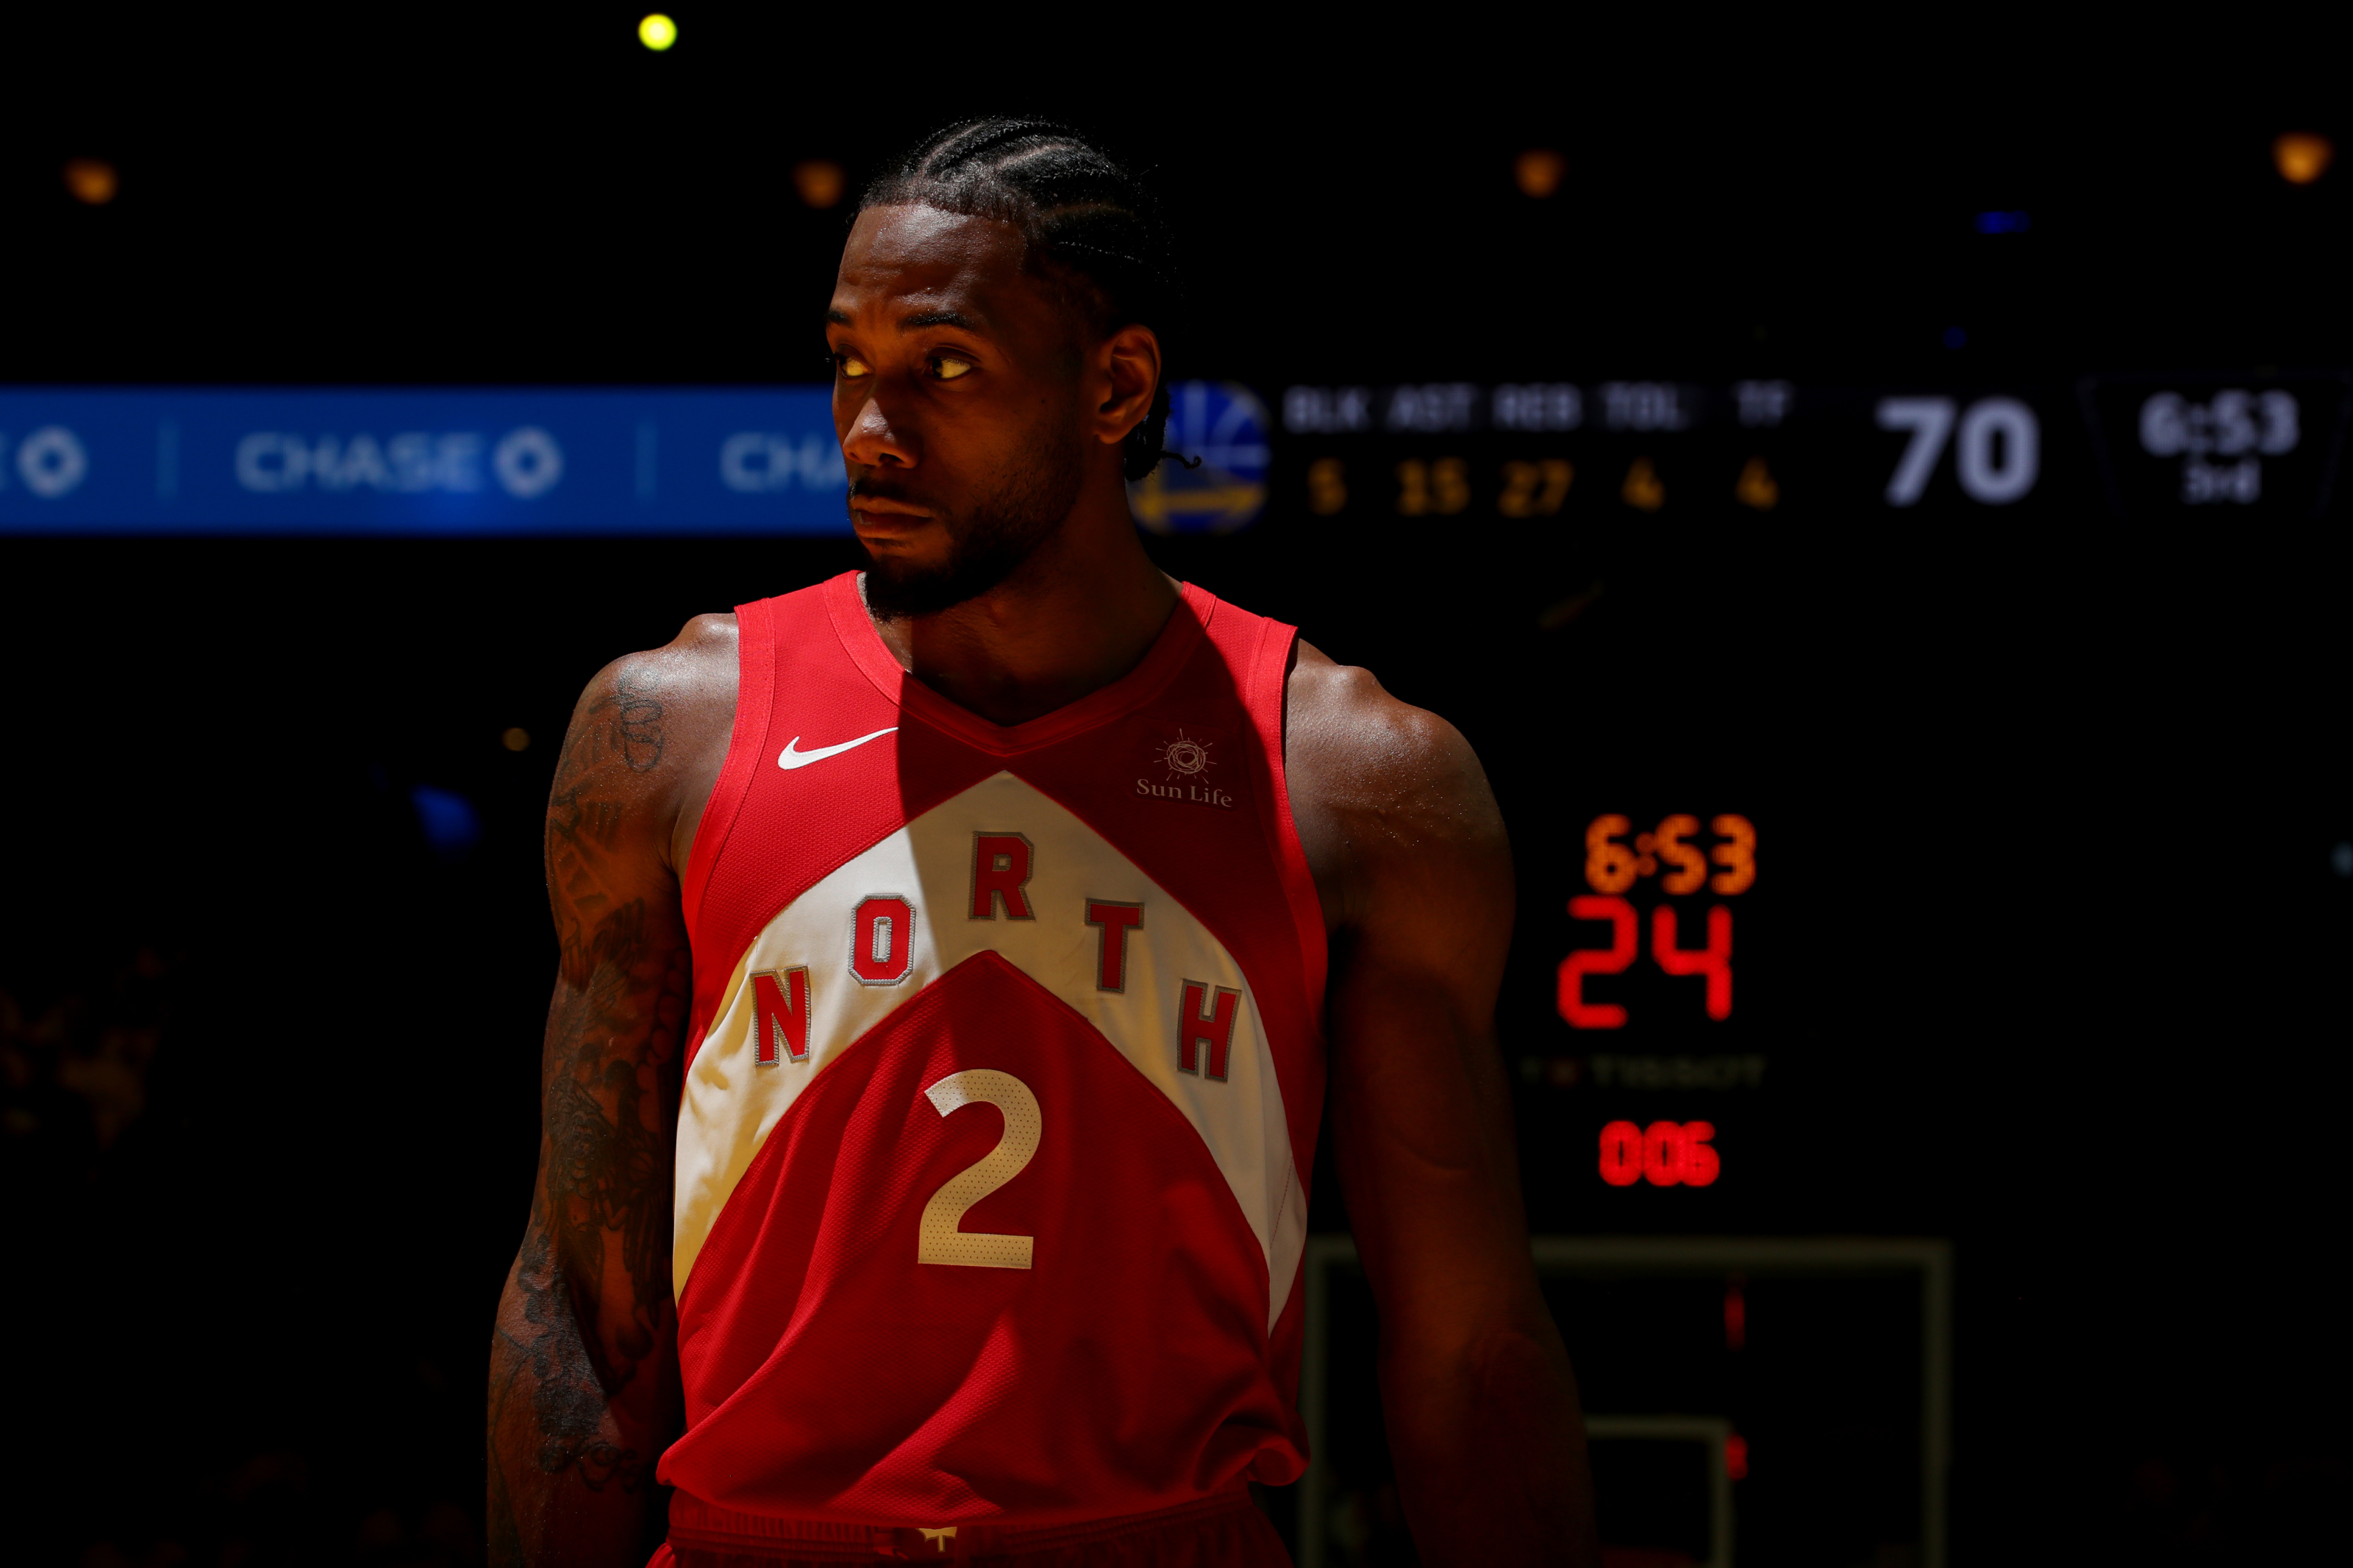 The Clippers' advantage over the Lakers? Kawhi Leonard, the best